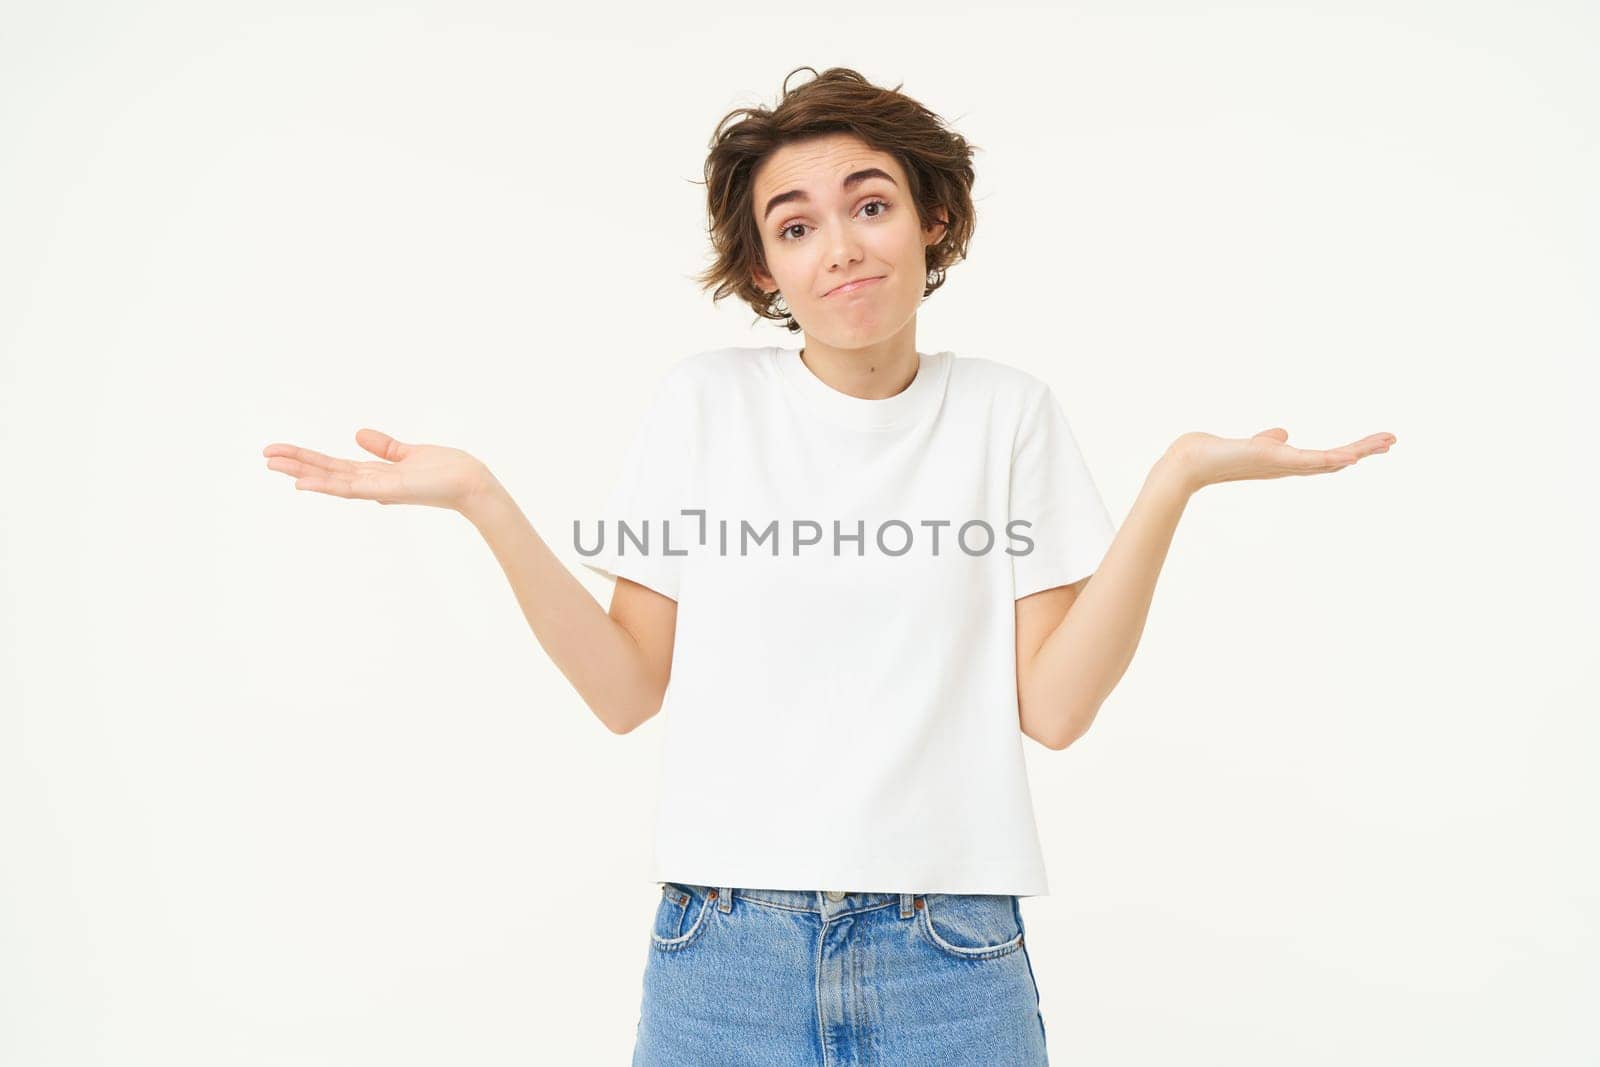 Woman shrugs her shoulders, looks clueless, doesnt know anything, stands confused against white background.